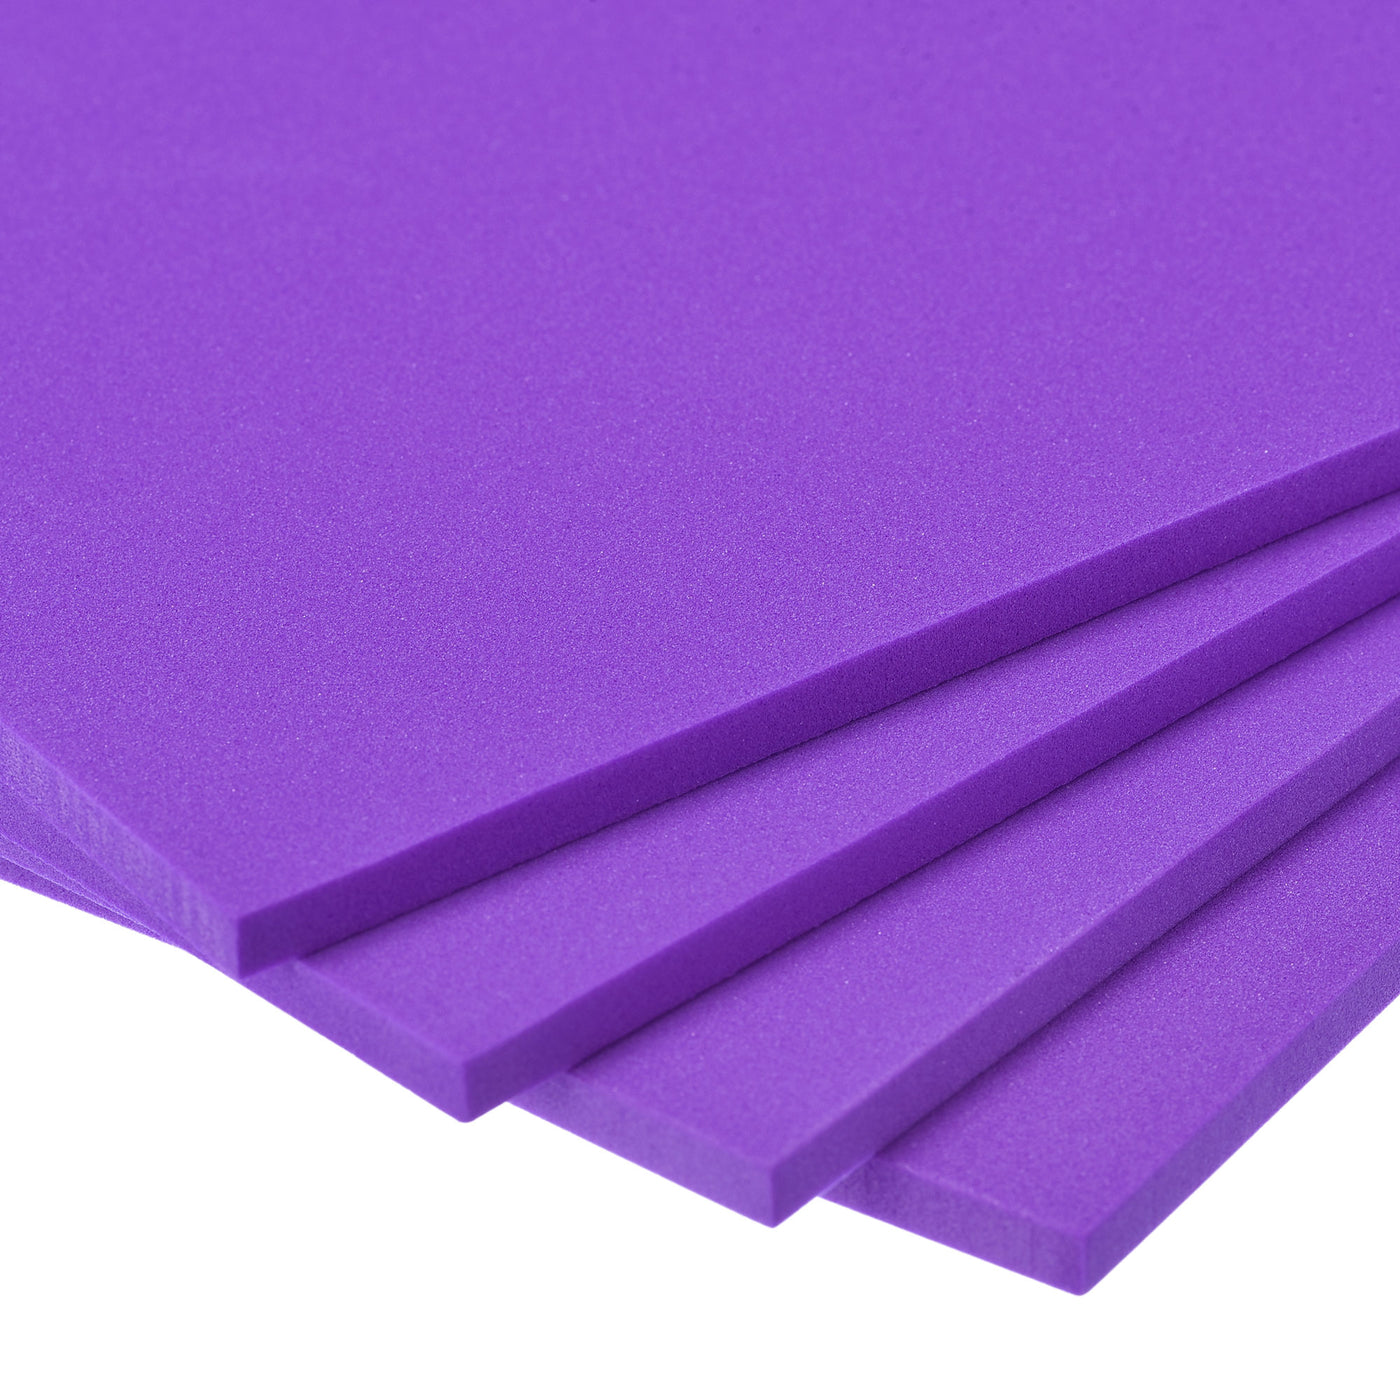 Uxcell Uxcell Purple EVA Foam Sheets 10 x 10 Inch 5mm Thickness for Crafts DIY Projects, 4 Pcs